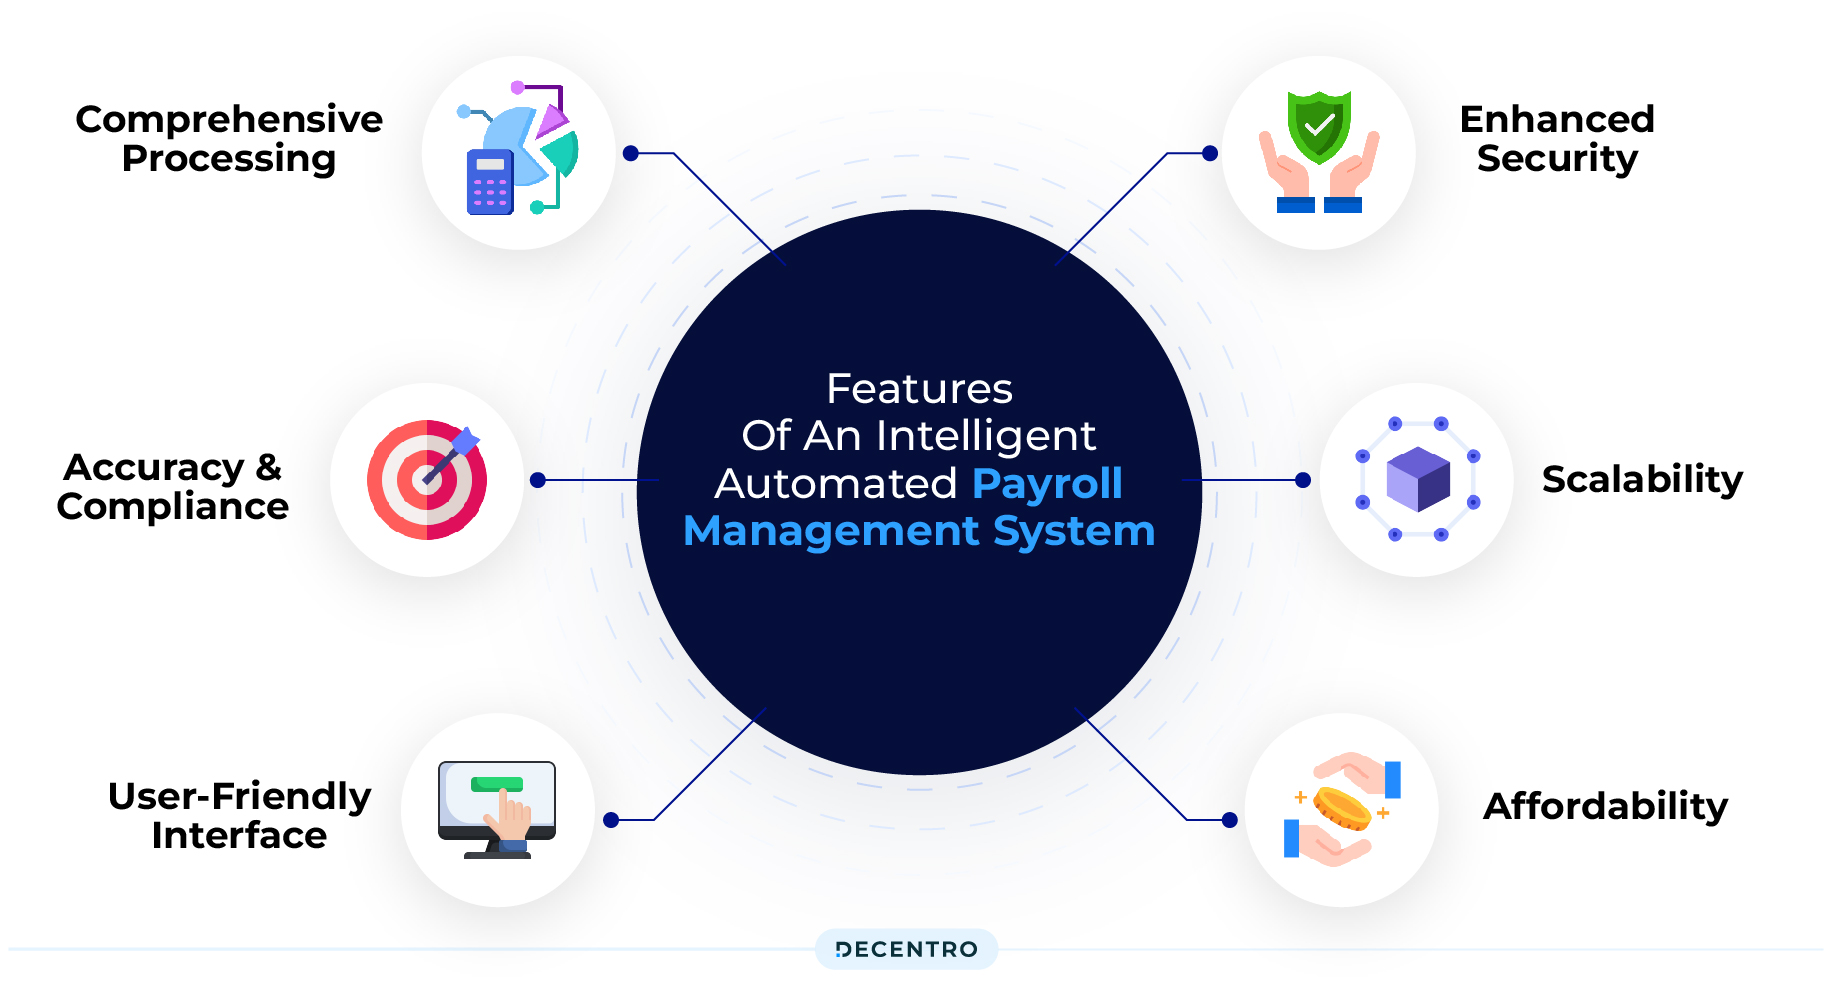 Features of an intelligent automated payroll management system